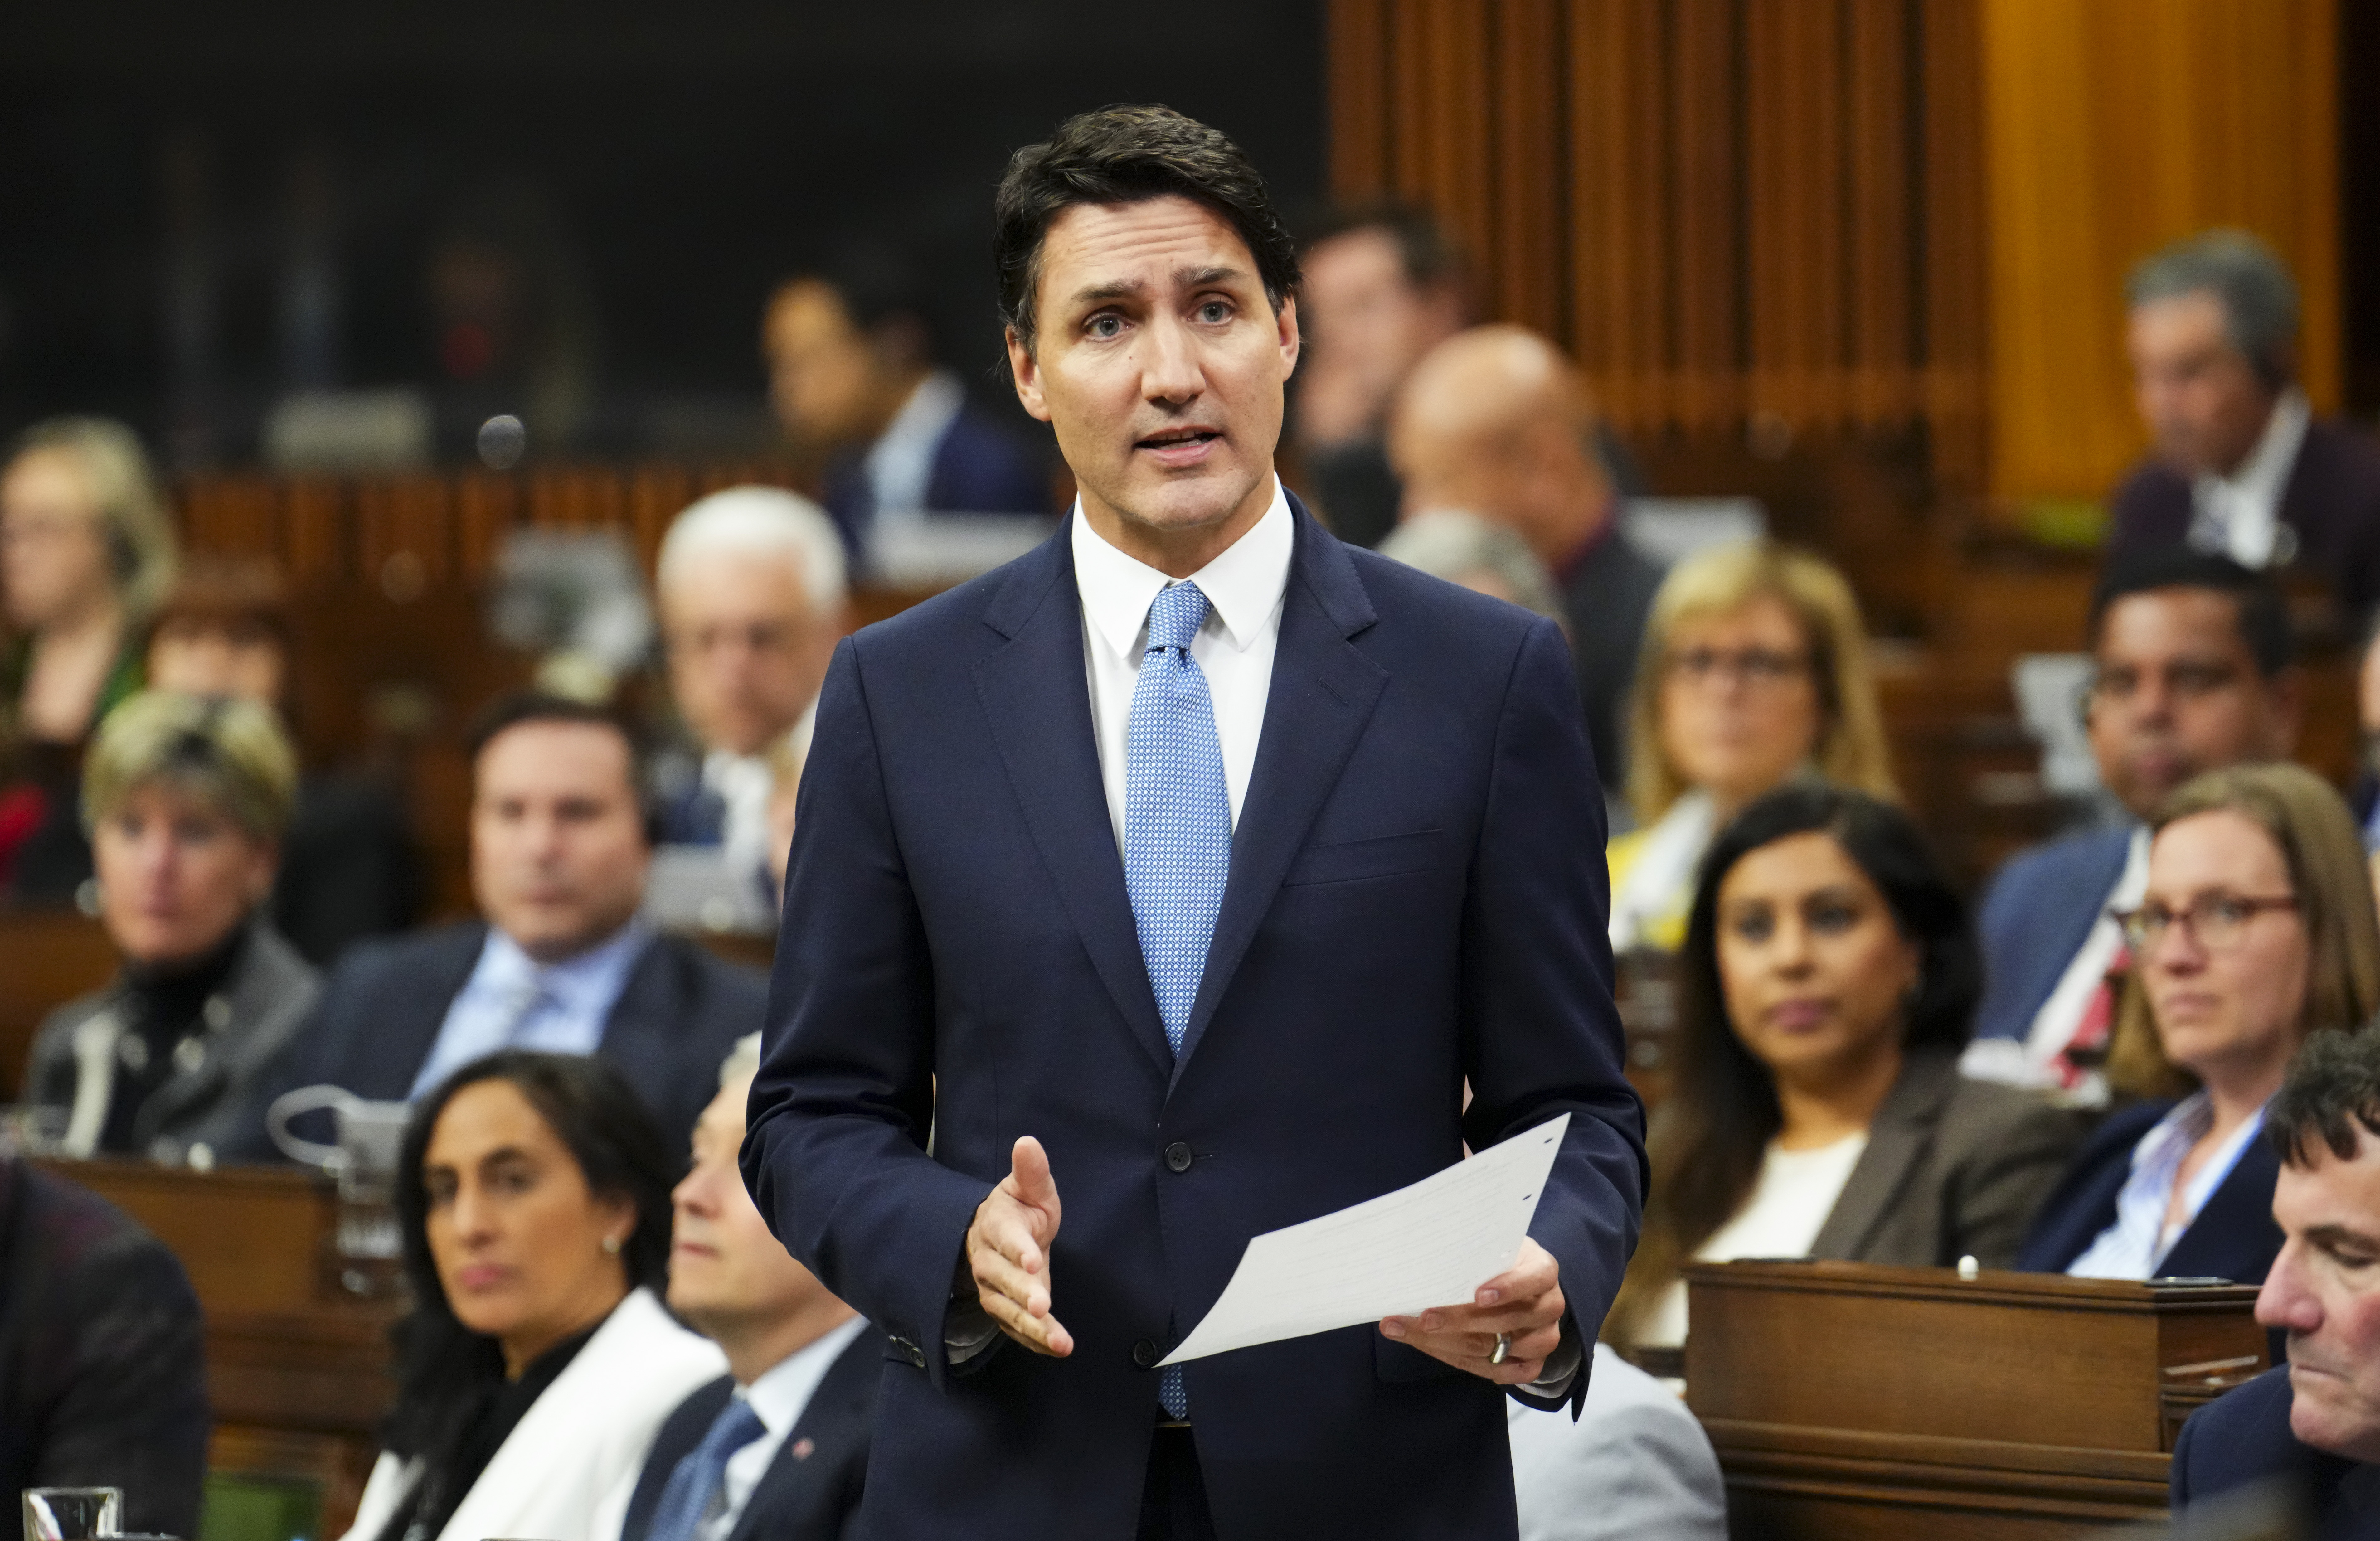 Prime Minister Justin Trudeau rises during question period in the House of Commons on Parliament Hill in Ottawa on Tuesday, May 2, 2023. THE CANADIAN PRESS/Sean Kilpatrick